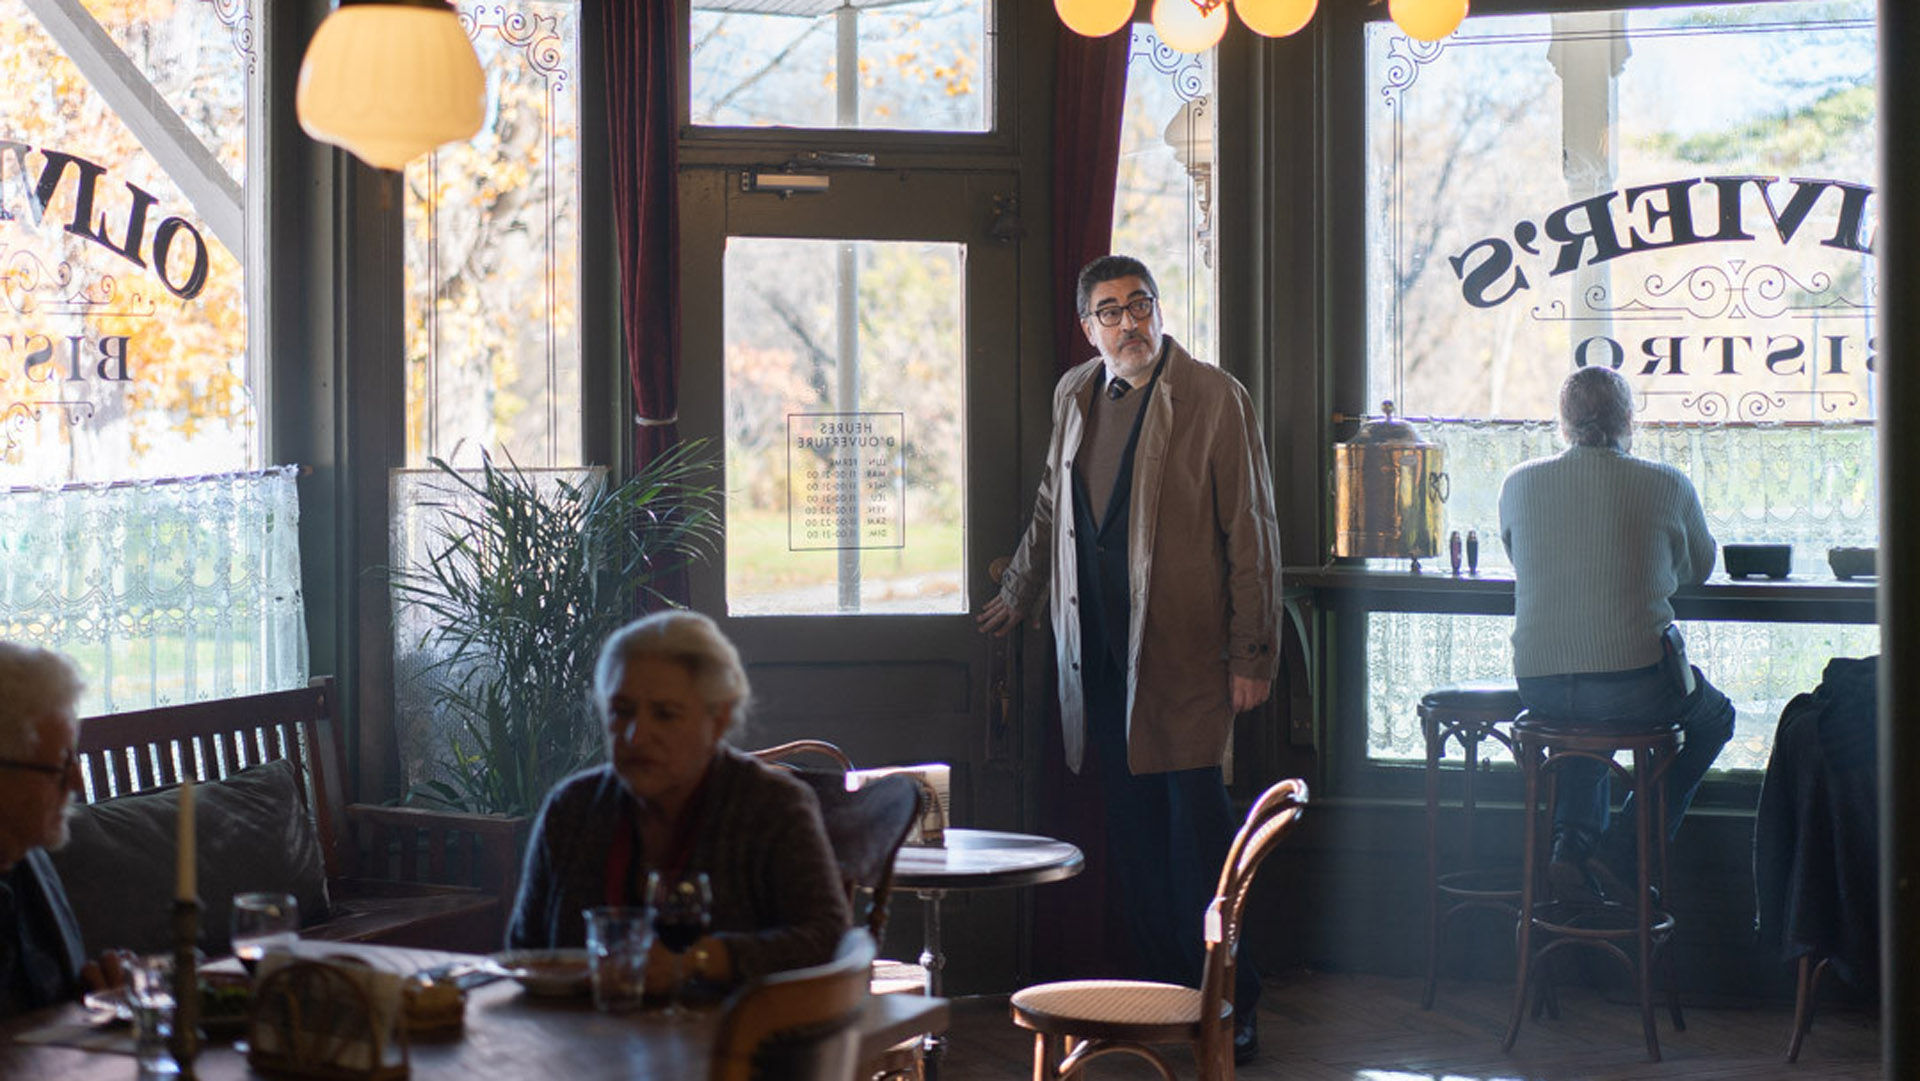 Inspector Armand Gamache enters a cafe in Prime Video's Three Pines TV series